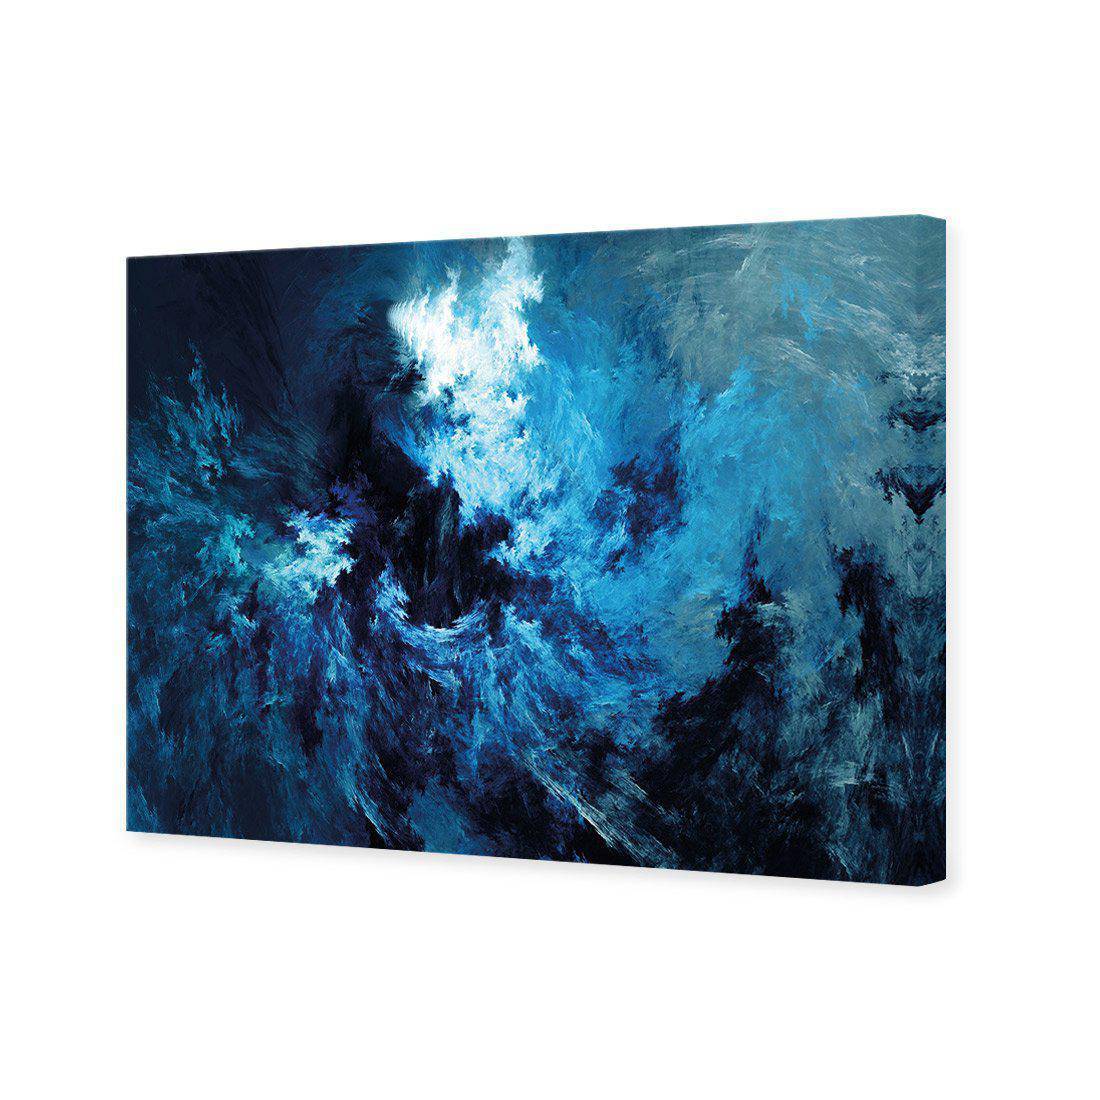 Into the Storm Canvas Art-Canvas-Wall Art Designs-45x30cm-Canvas - No Frame-Wall Art Designs